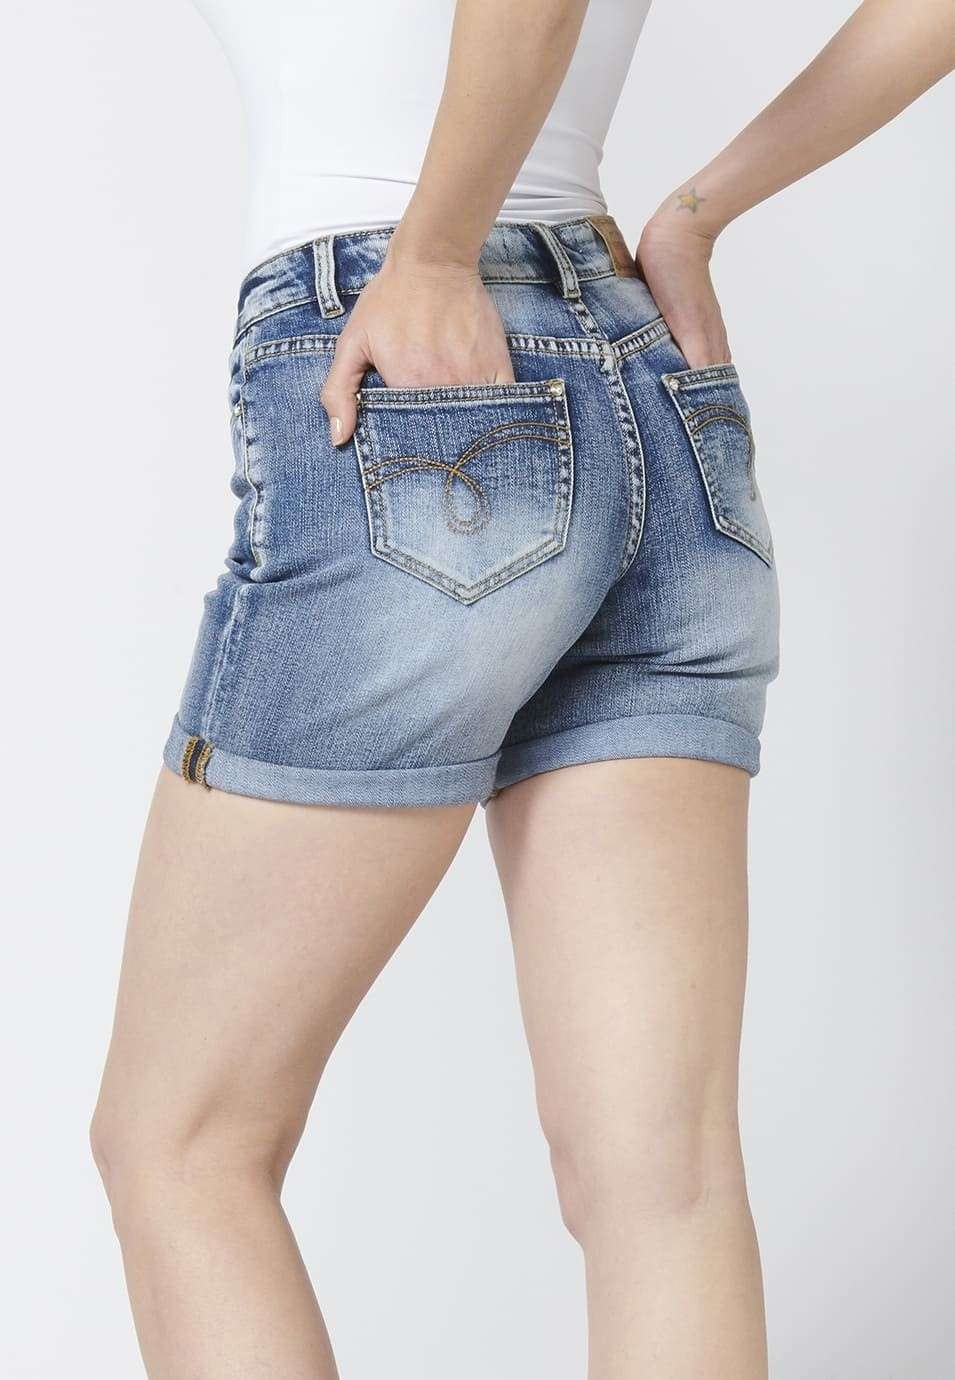 Women's denim shorts elastic jean shorts above the knee with ripped details